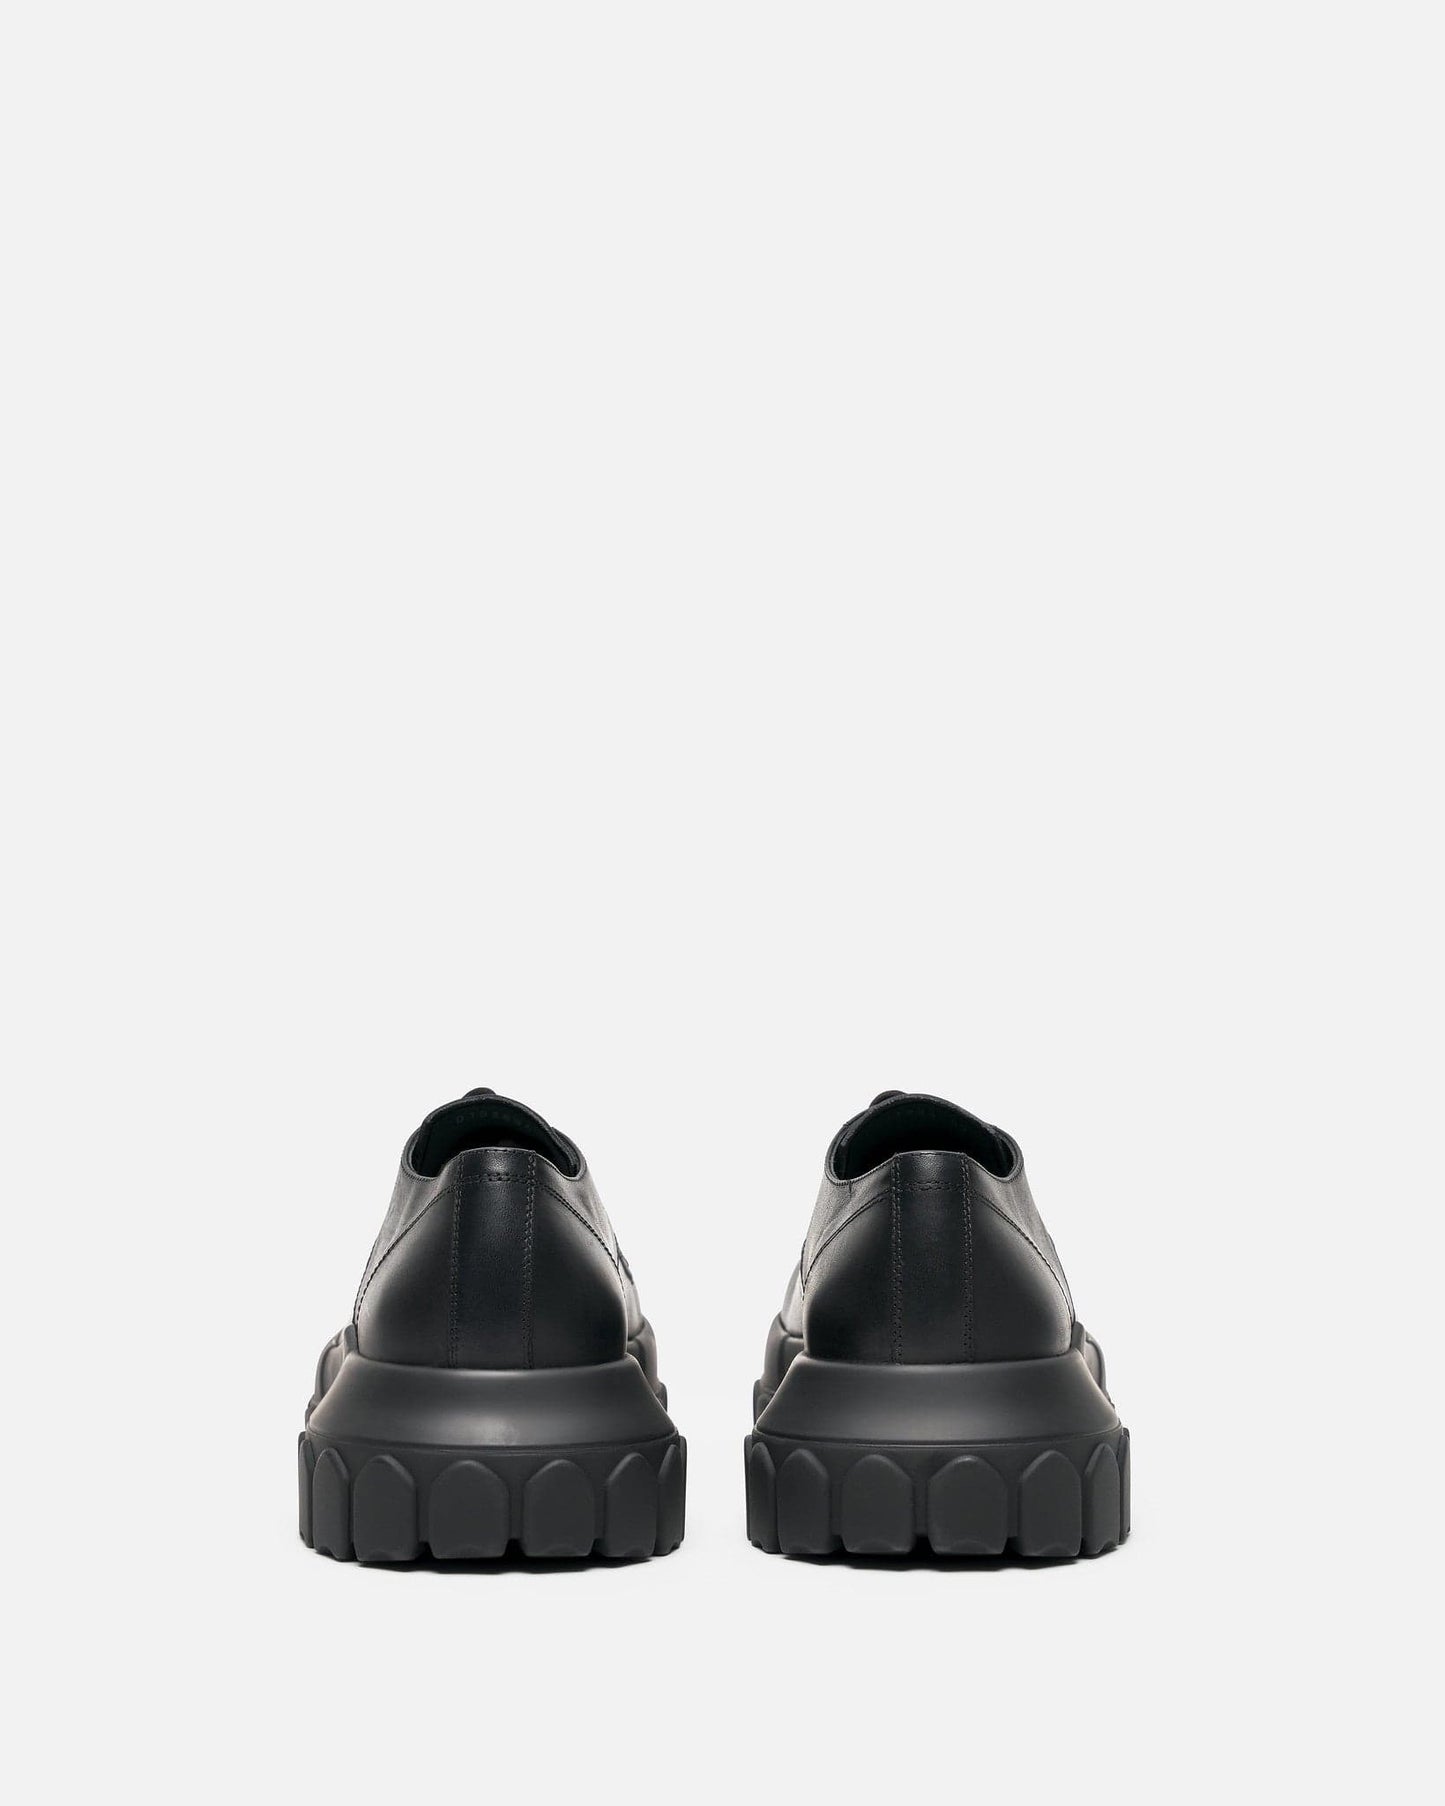 Rick Owens Men's Shoes Laceup Bozo Tractor Derby in Black/Black